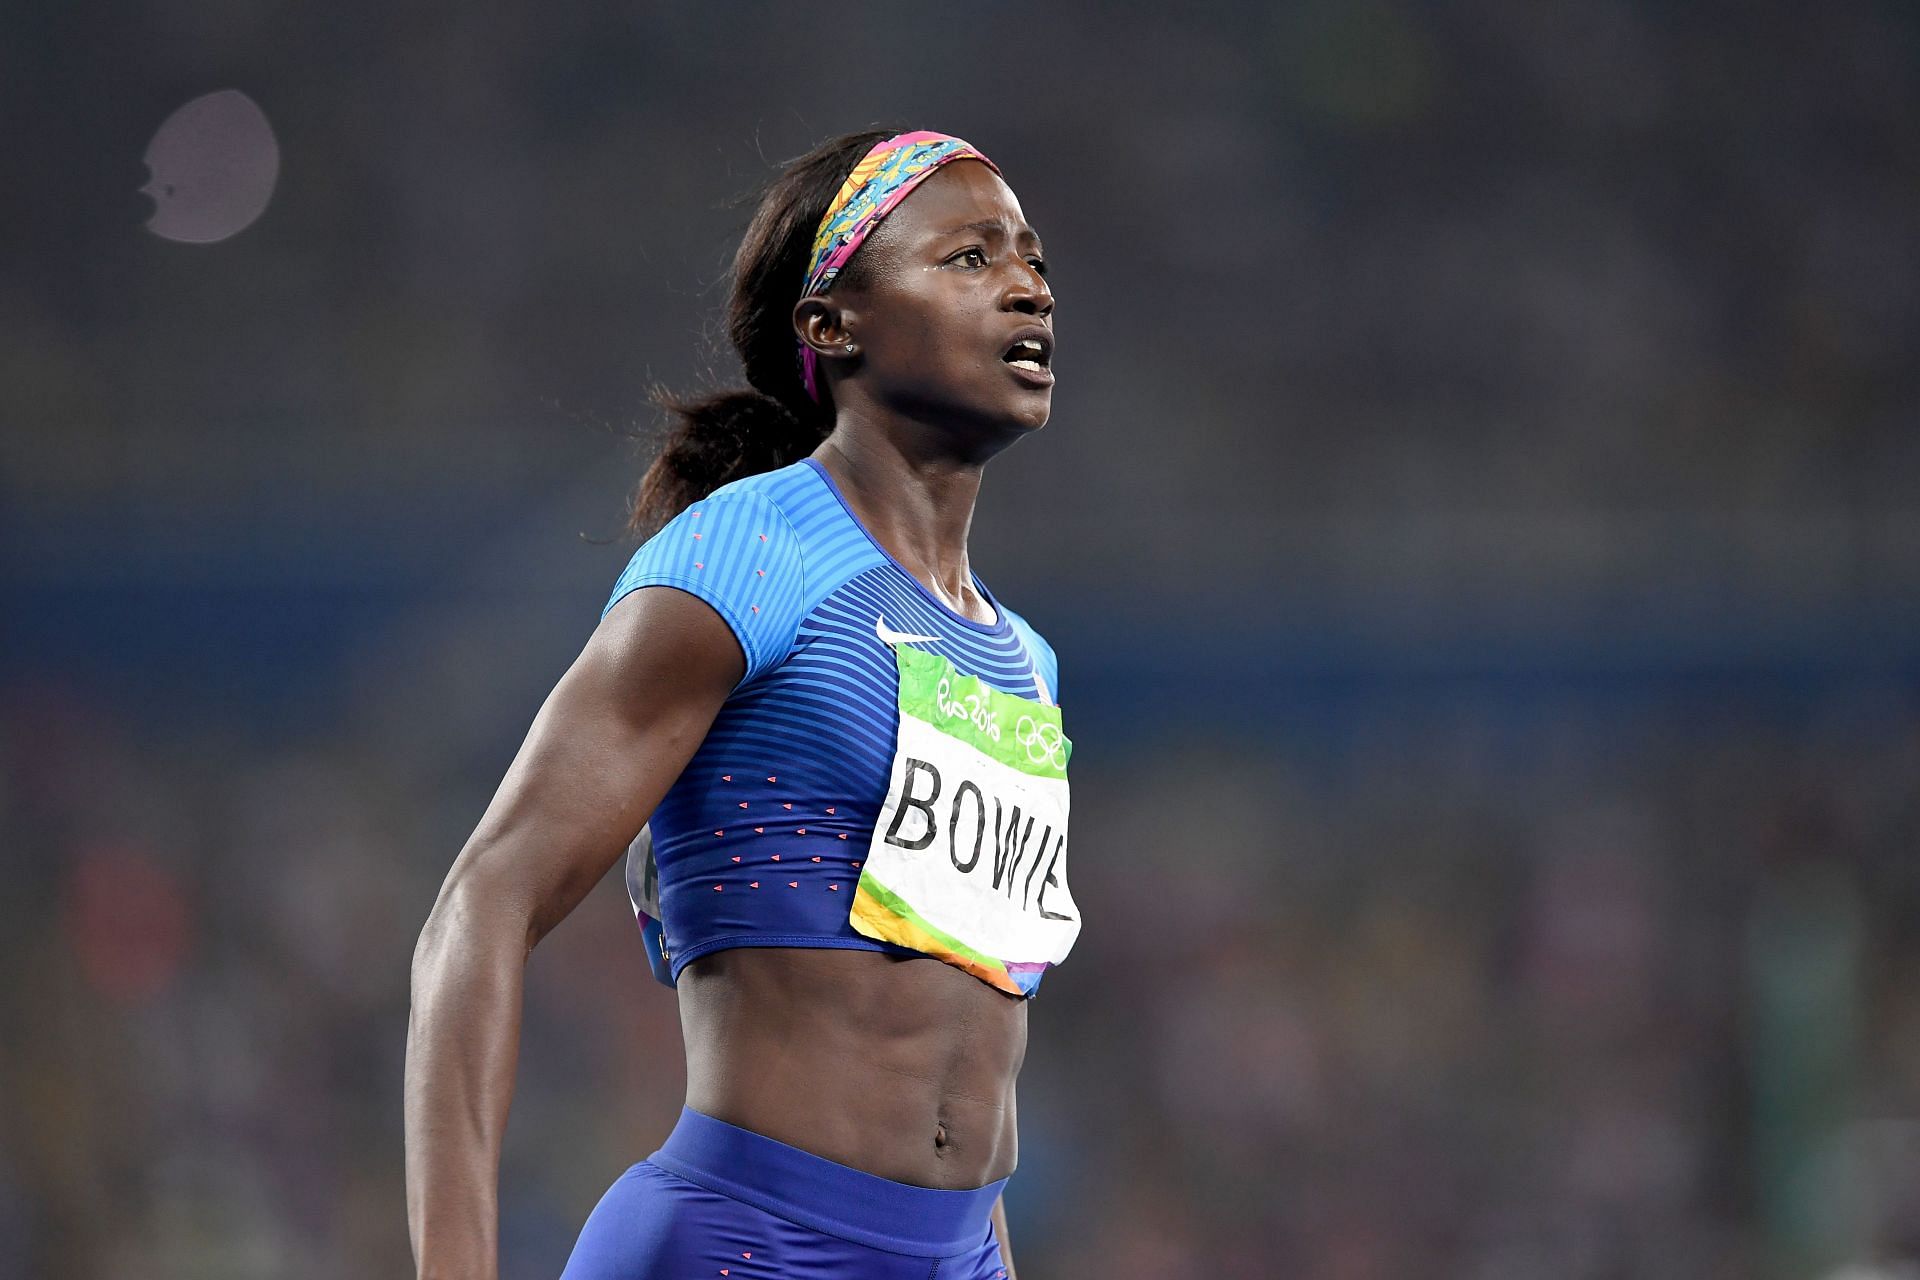 Tori Bowie of the United States crosses the finishline to win the Women&#039;s 4 x 100m Relay Final on Day 14 of the Rio 2016 Olympic Games